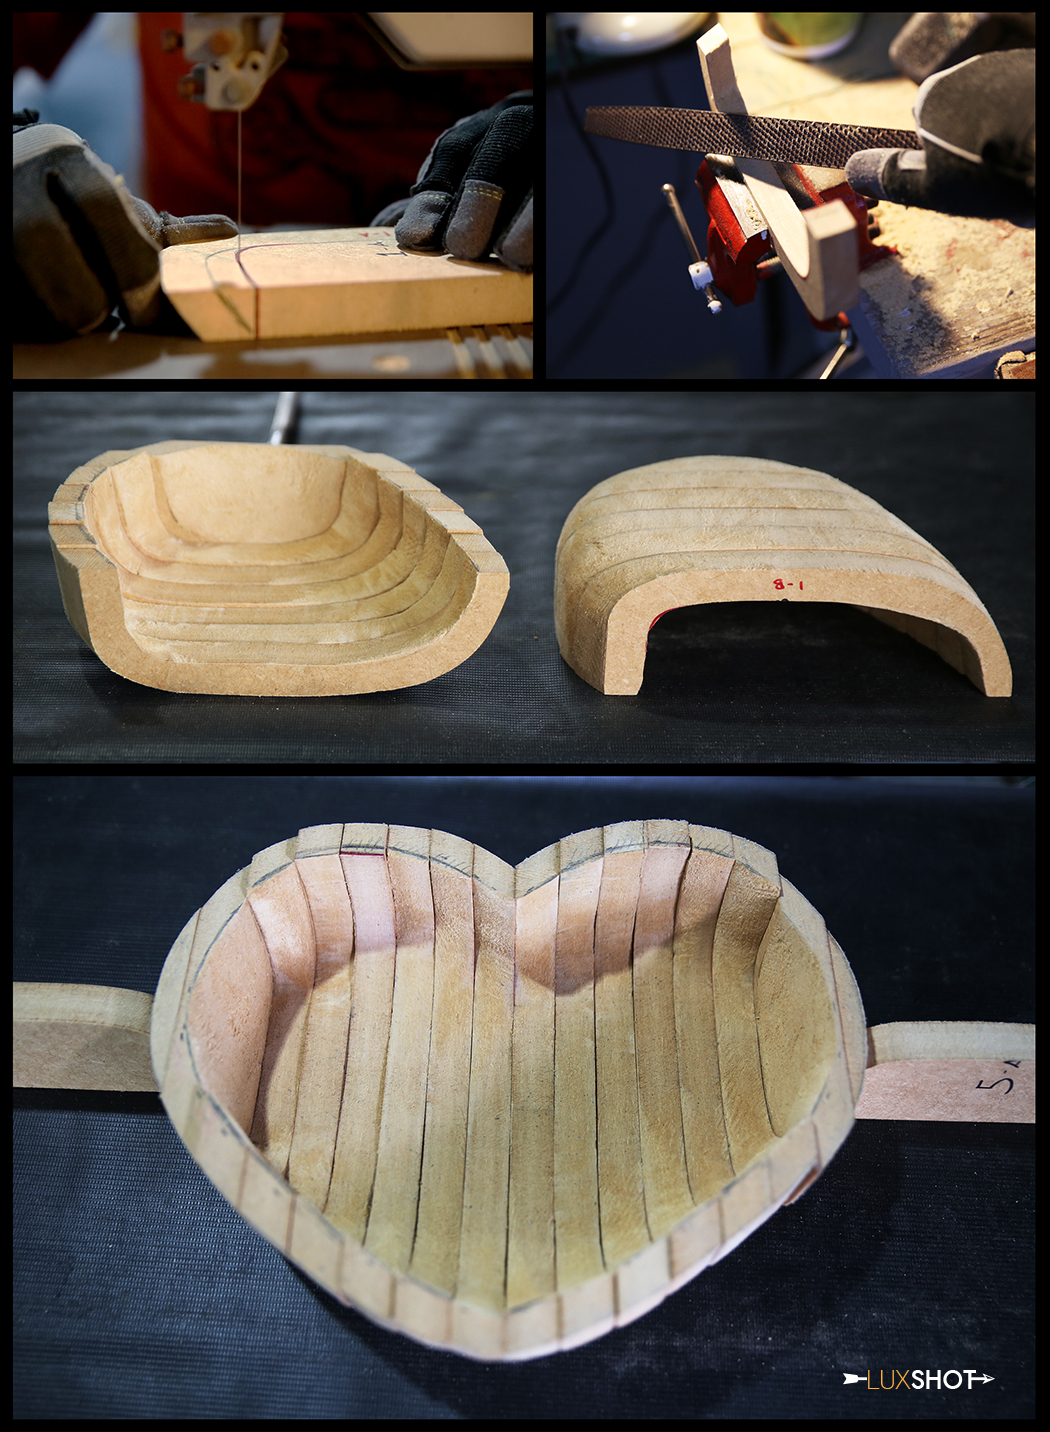 Finished making the mask hollow. With the Band Saw I cut the inside of each slice so when all were put together, voilà! got myself a hollow heart!...